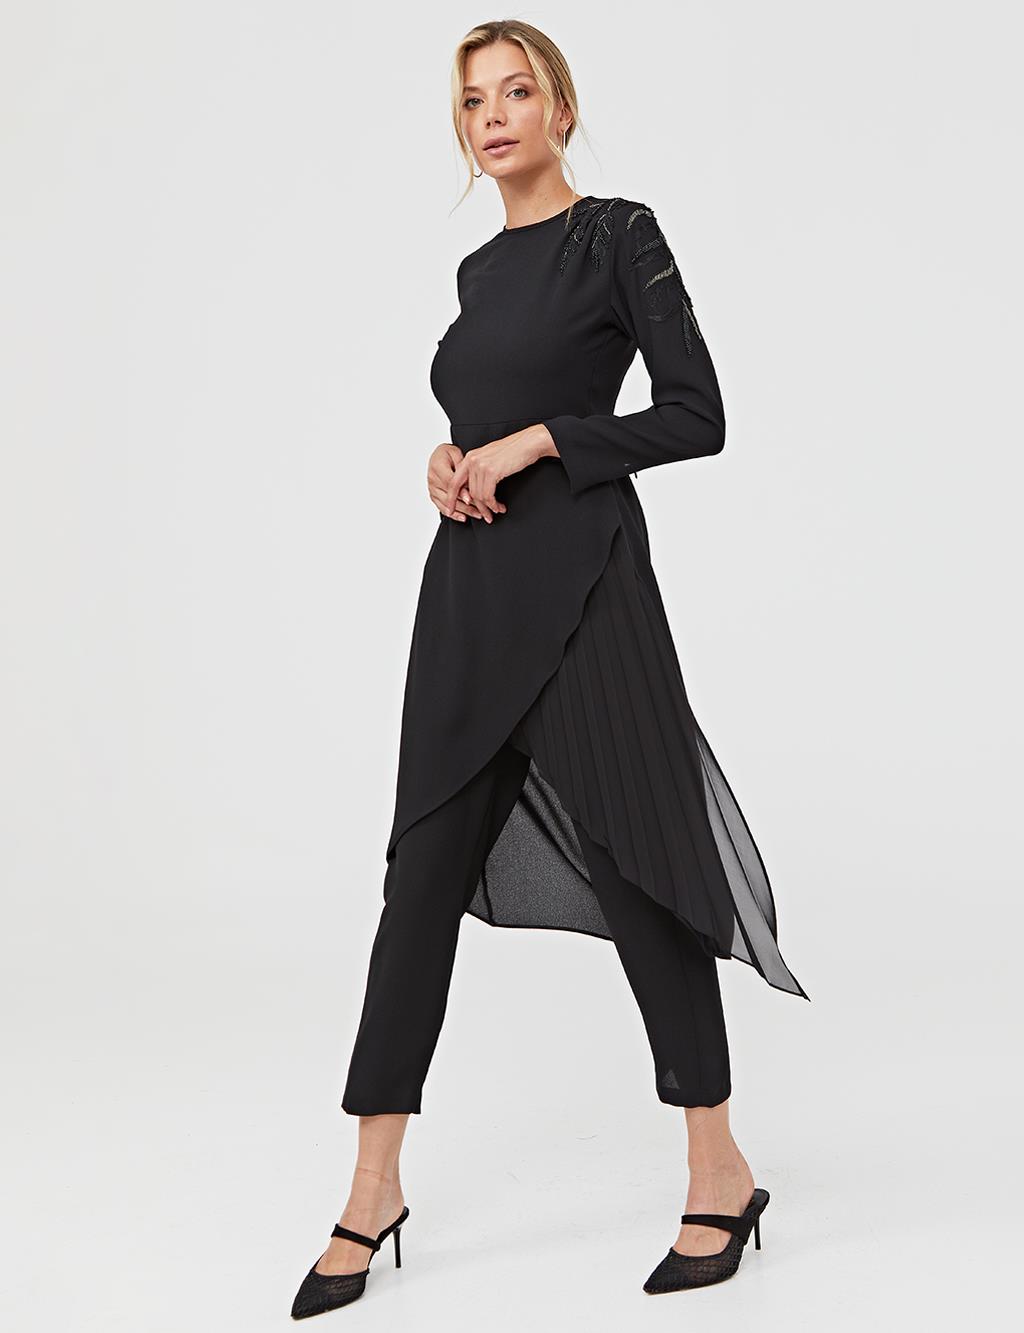 Shoulder Embroidered Asymmetric Cut Binary Suit A21 16003 Black